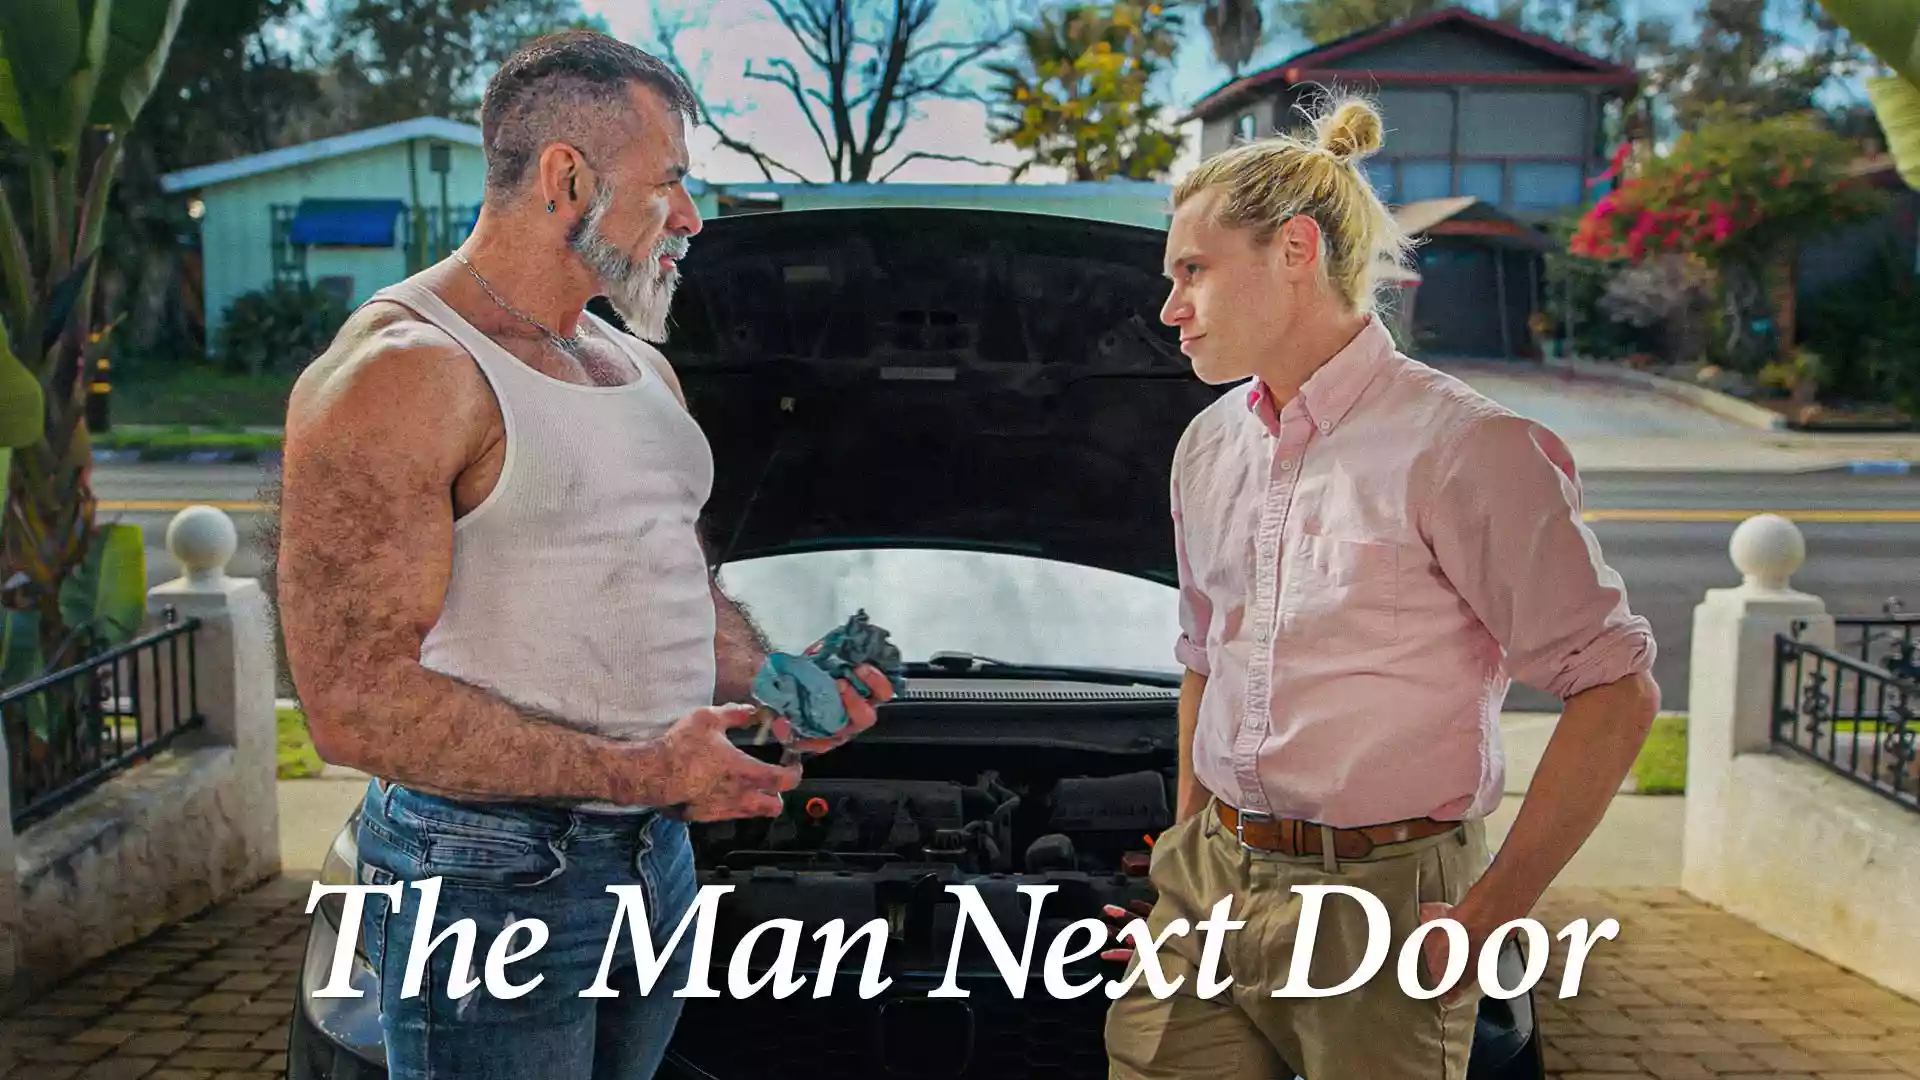 The Man Next Door – Johnny Moon and Lawson James